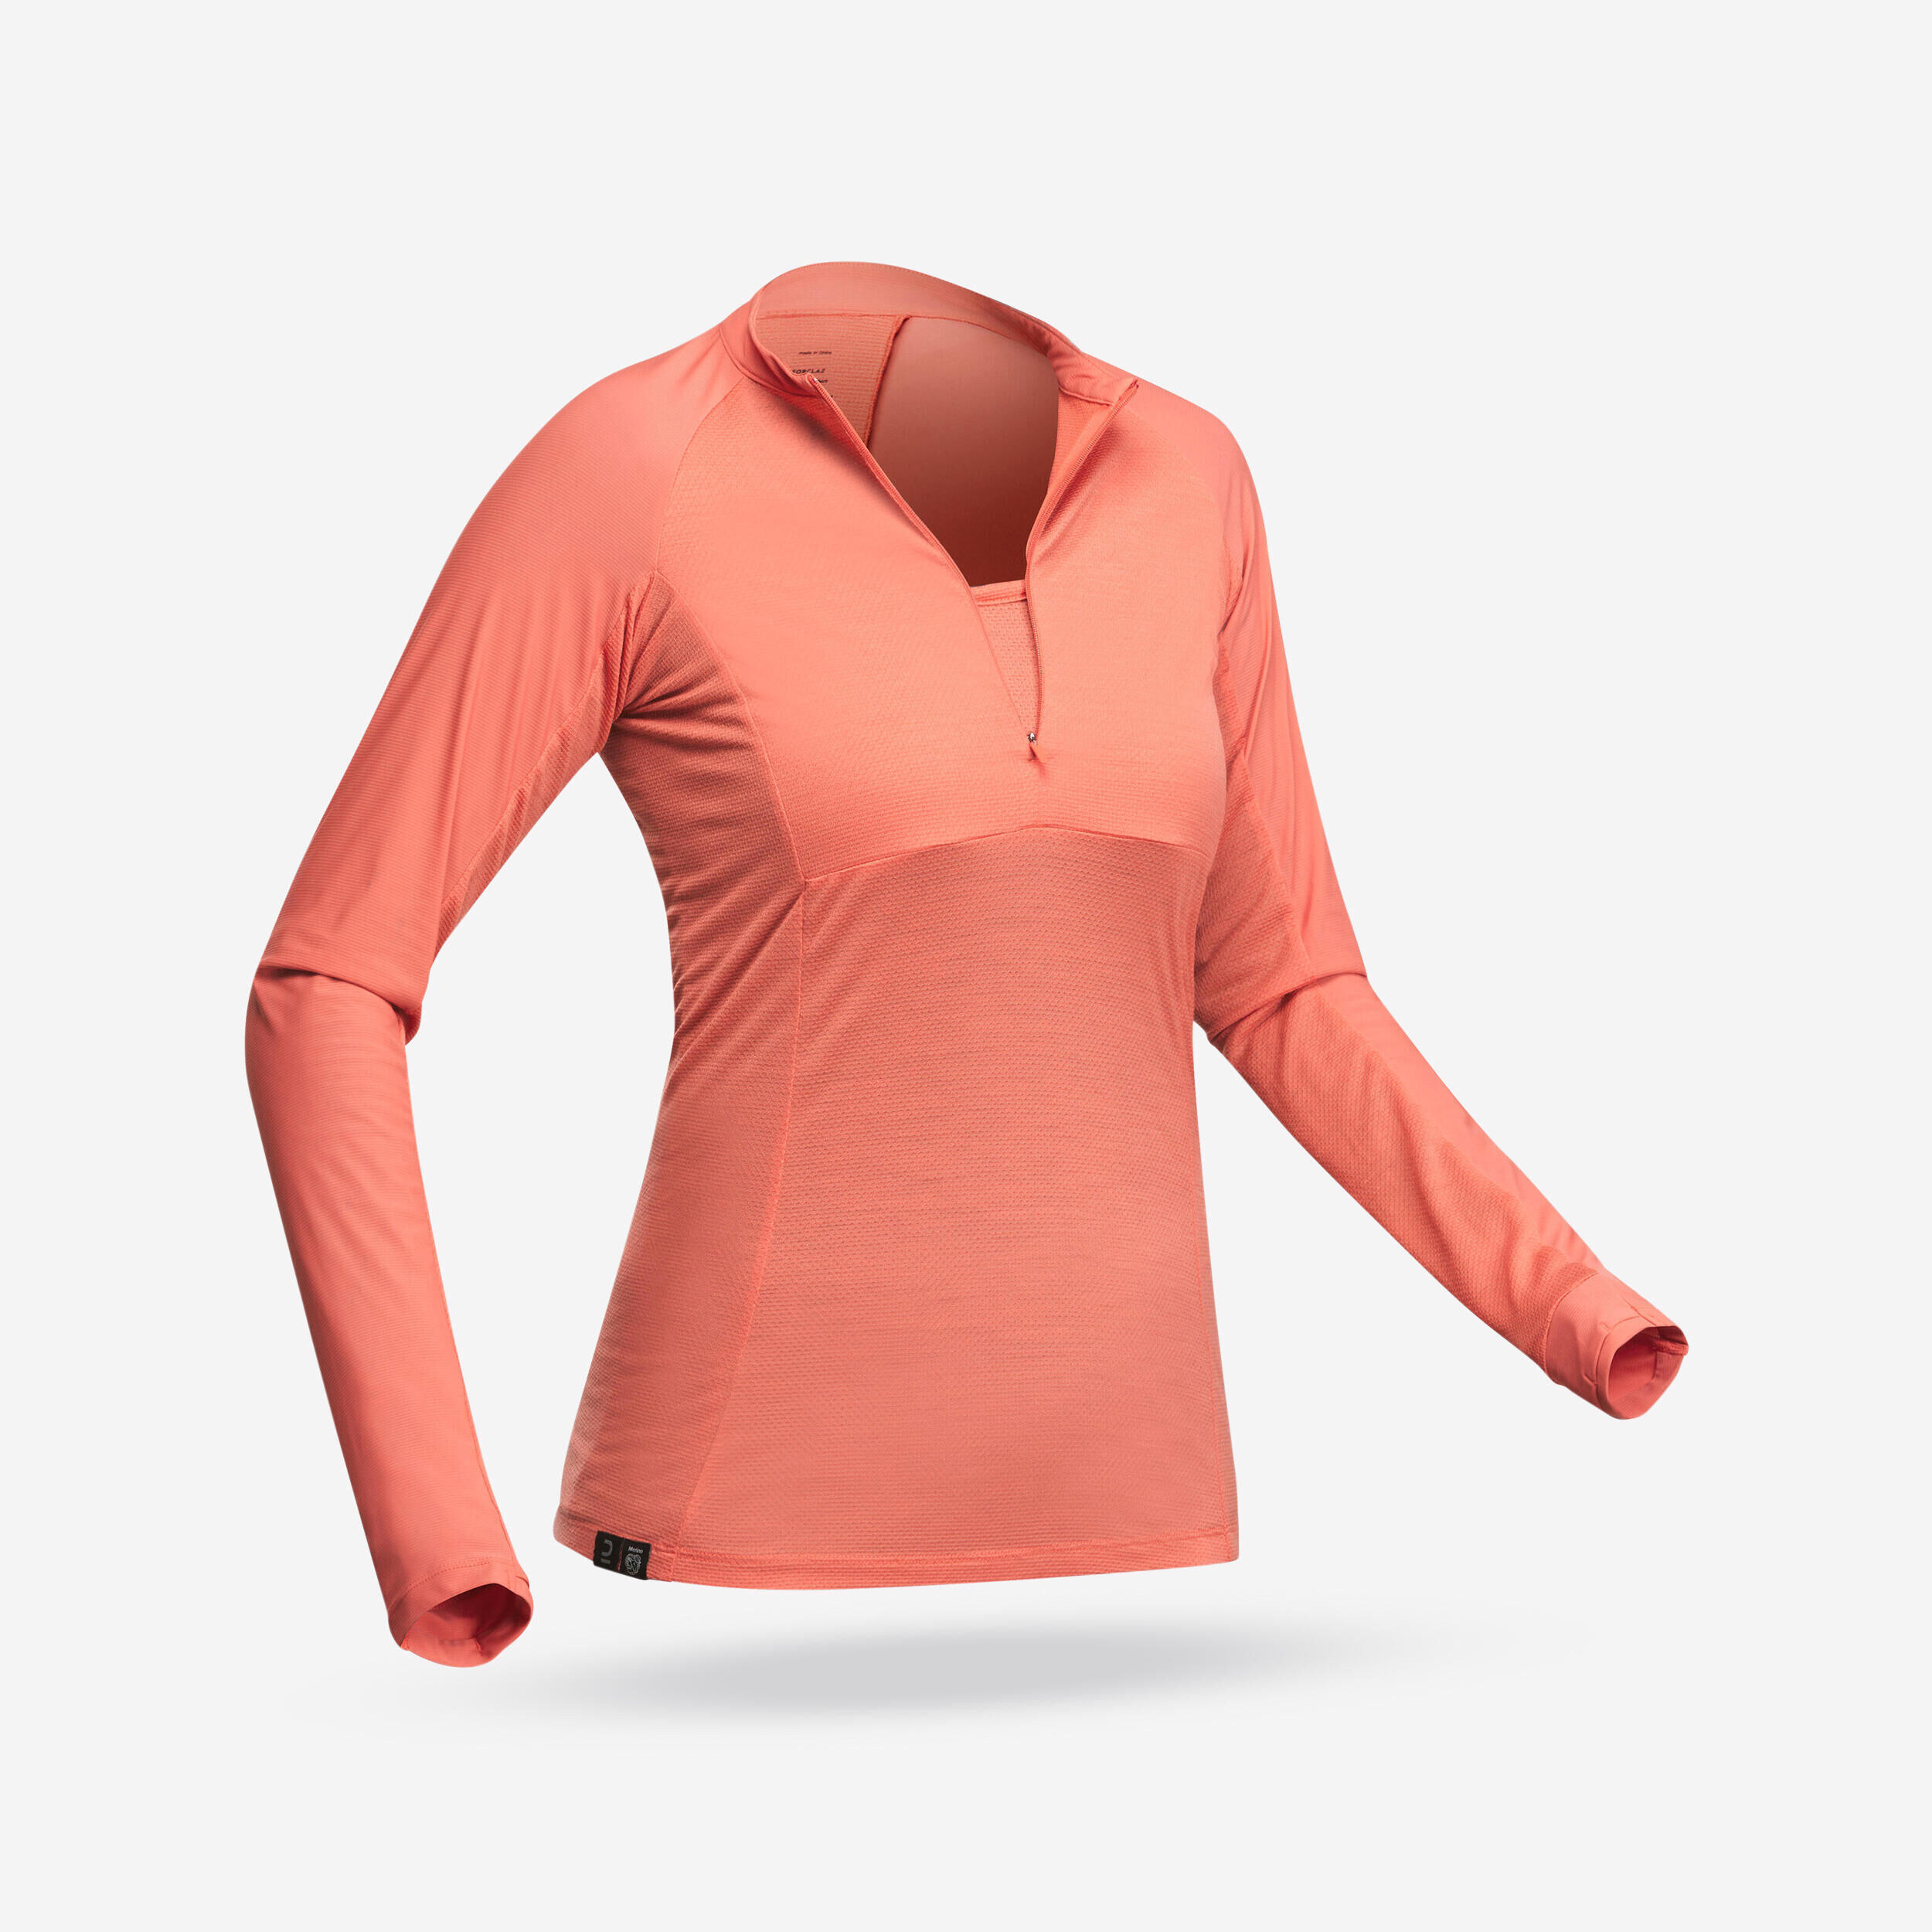 FORCLAZ Women’s long-sleeved t-shirt  Tropic 900 coral